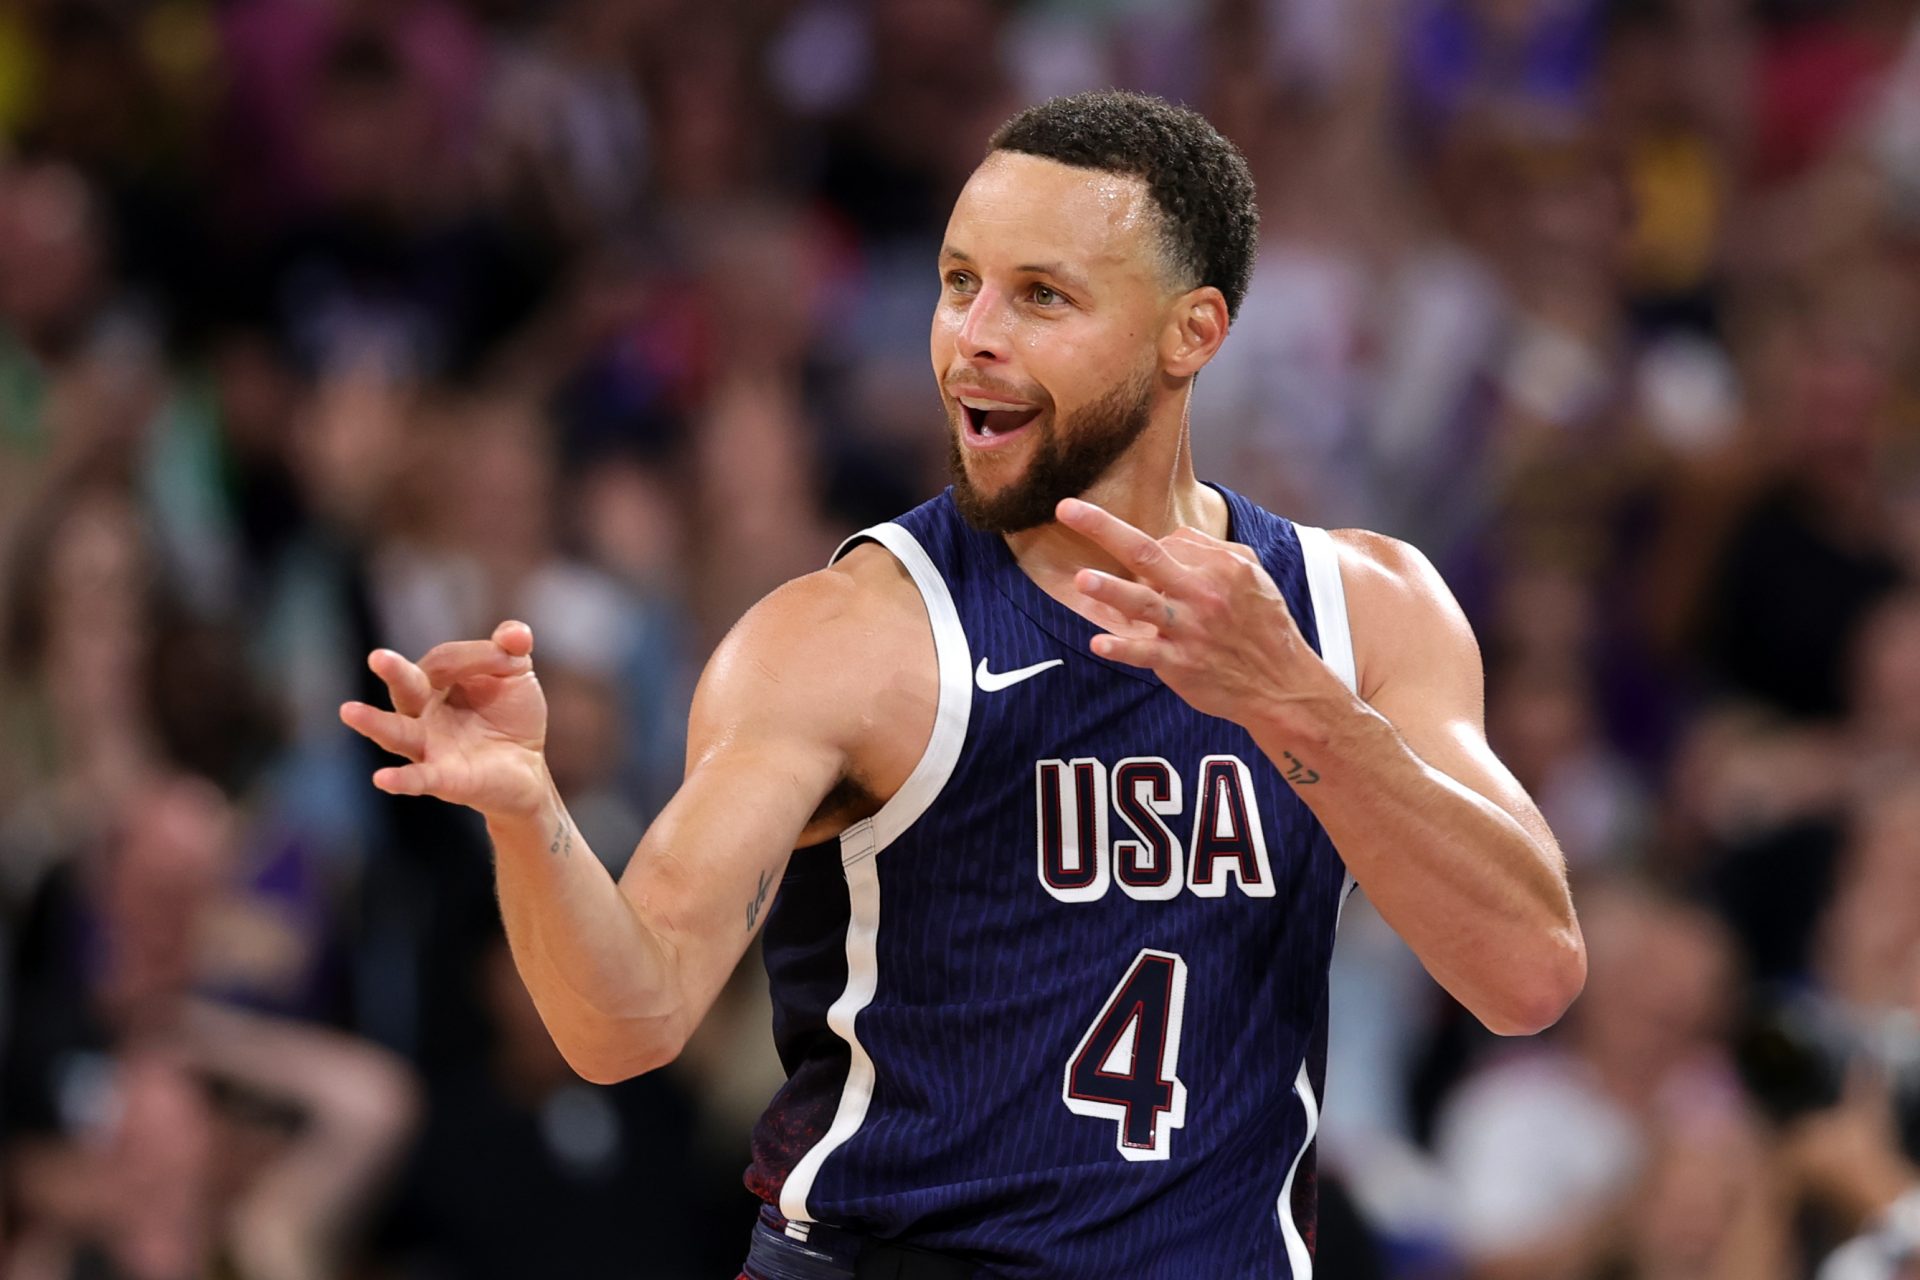 The most important lessons learned from the United States’ blowout win over Serbia